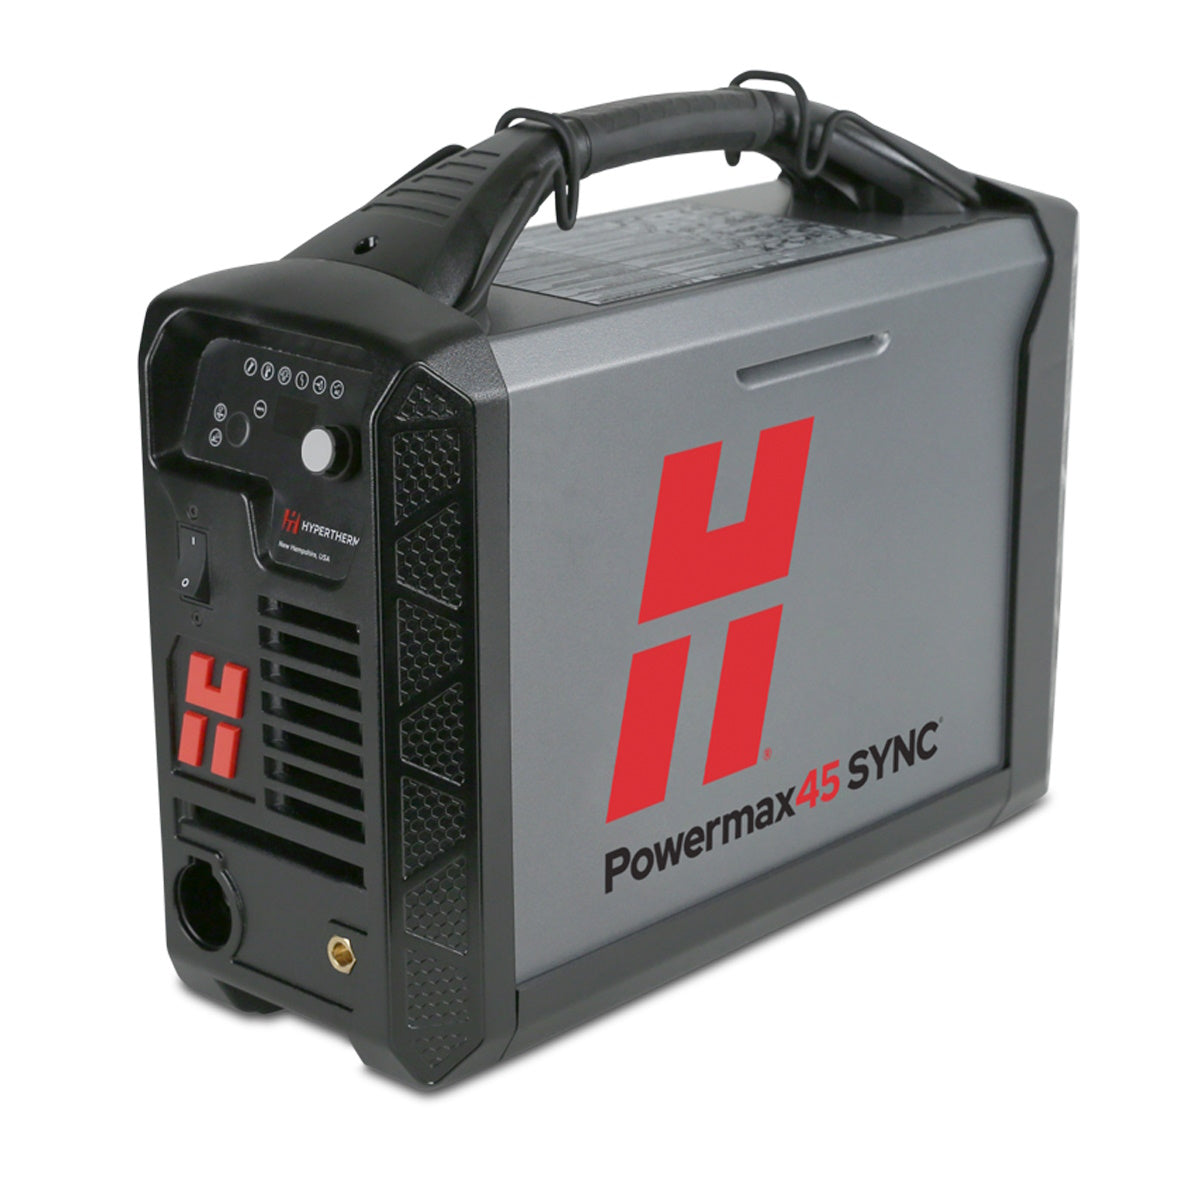 Hypertherm Powermax45 SYNC Plasma w/CPC 20ft 75° Hand and 25ft 180° Mech Torches (088583)